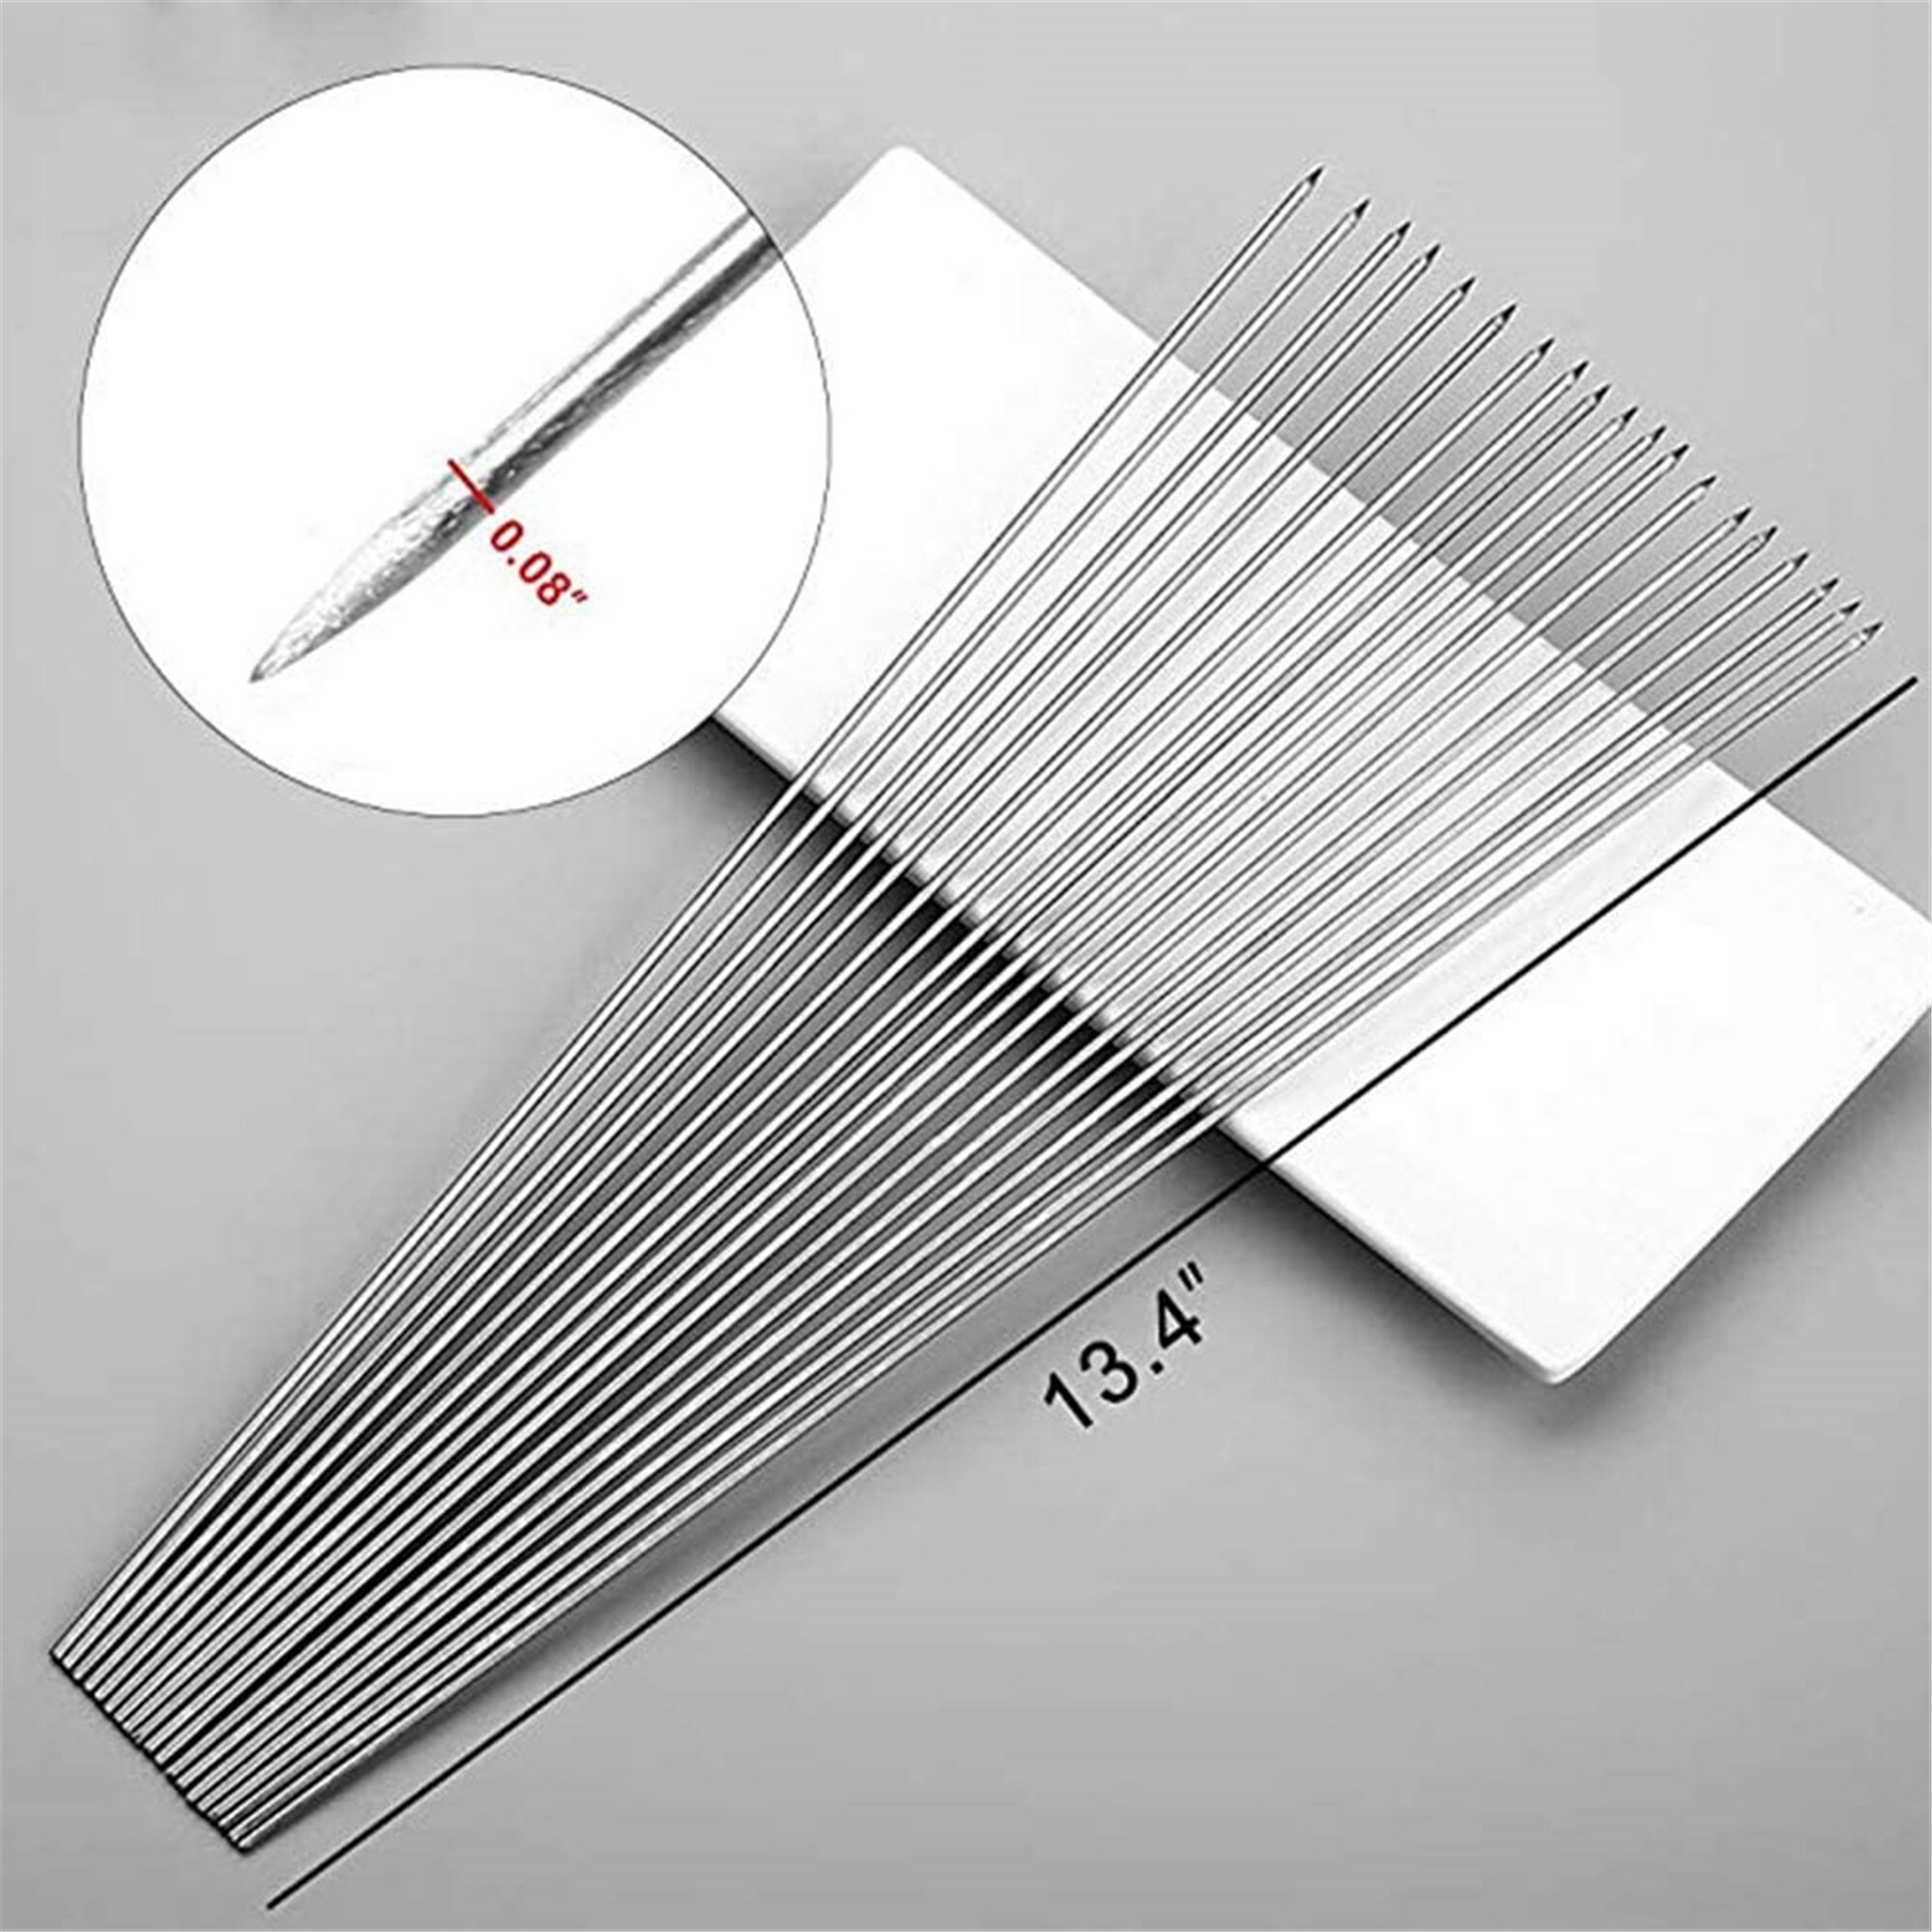 100 Pcs Barbecue Skewers Stainless Steel Barbecue Skewer 13 BBQ Needle with Portable Storage Tube for Outings Cooking Party Tools